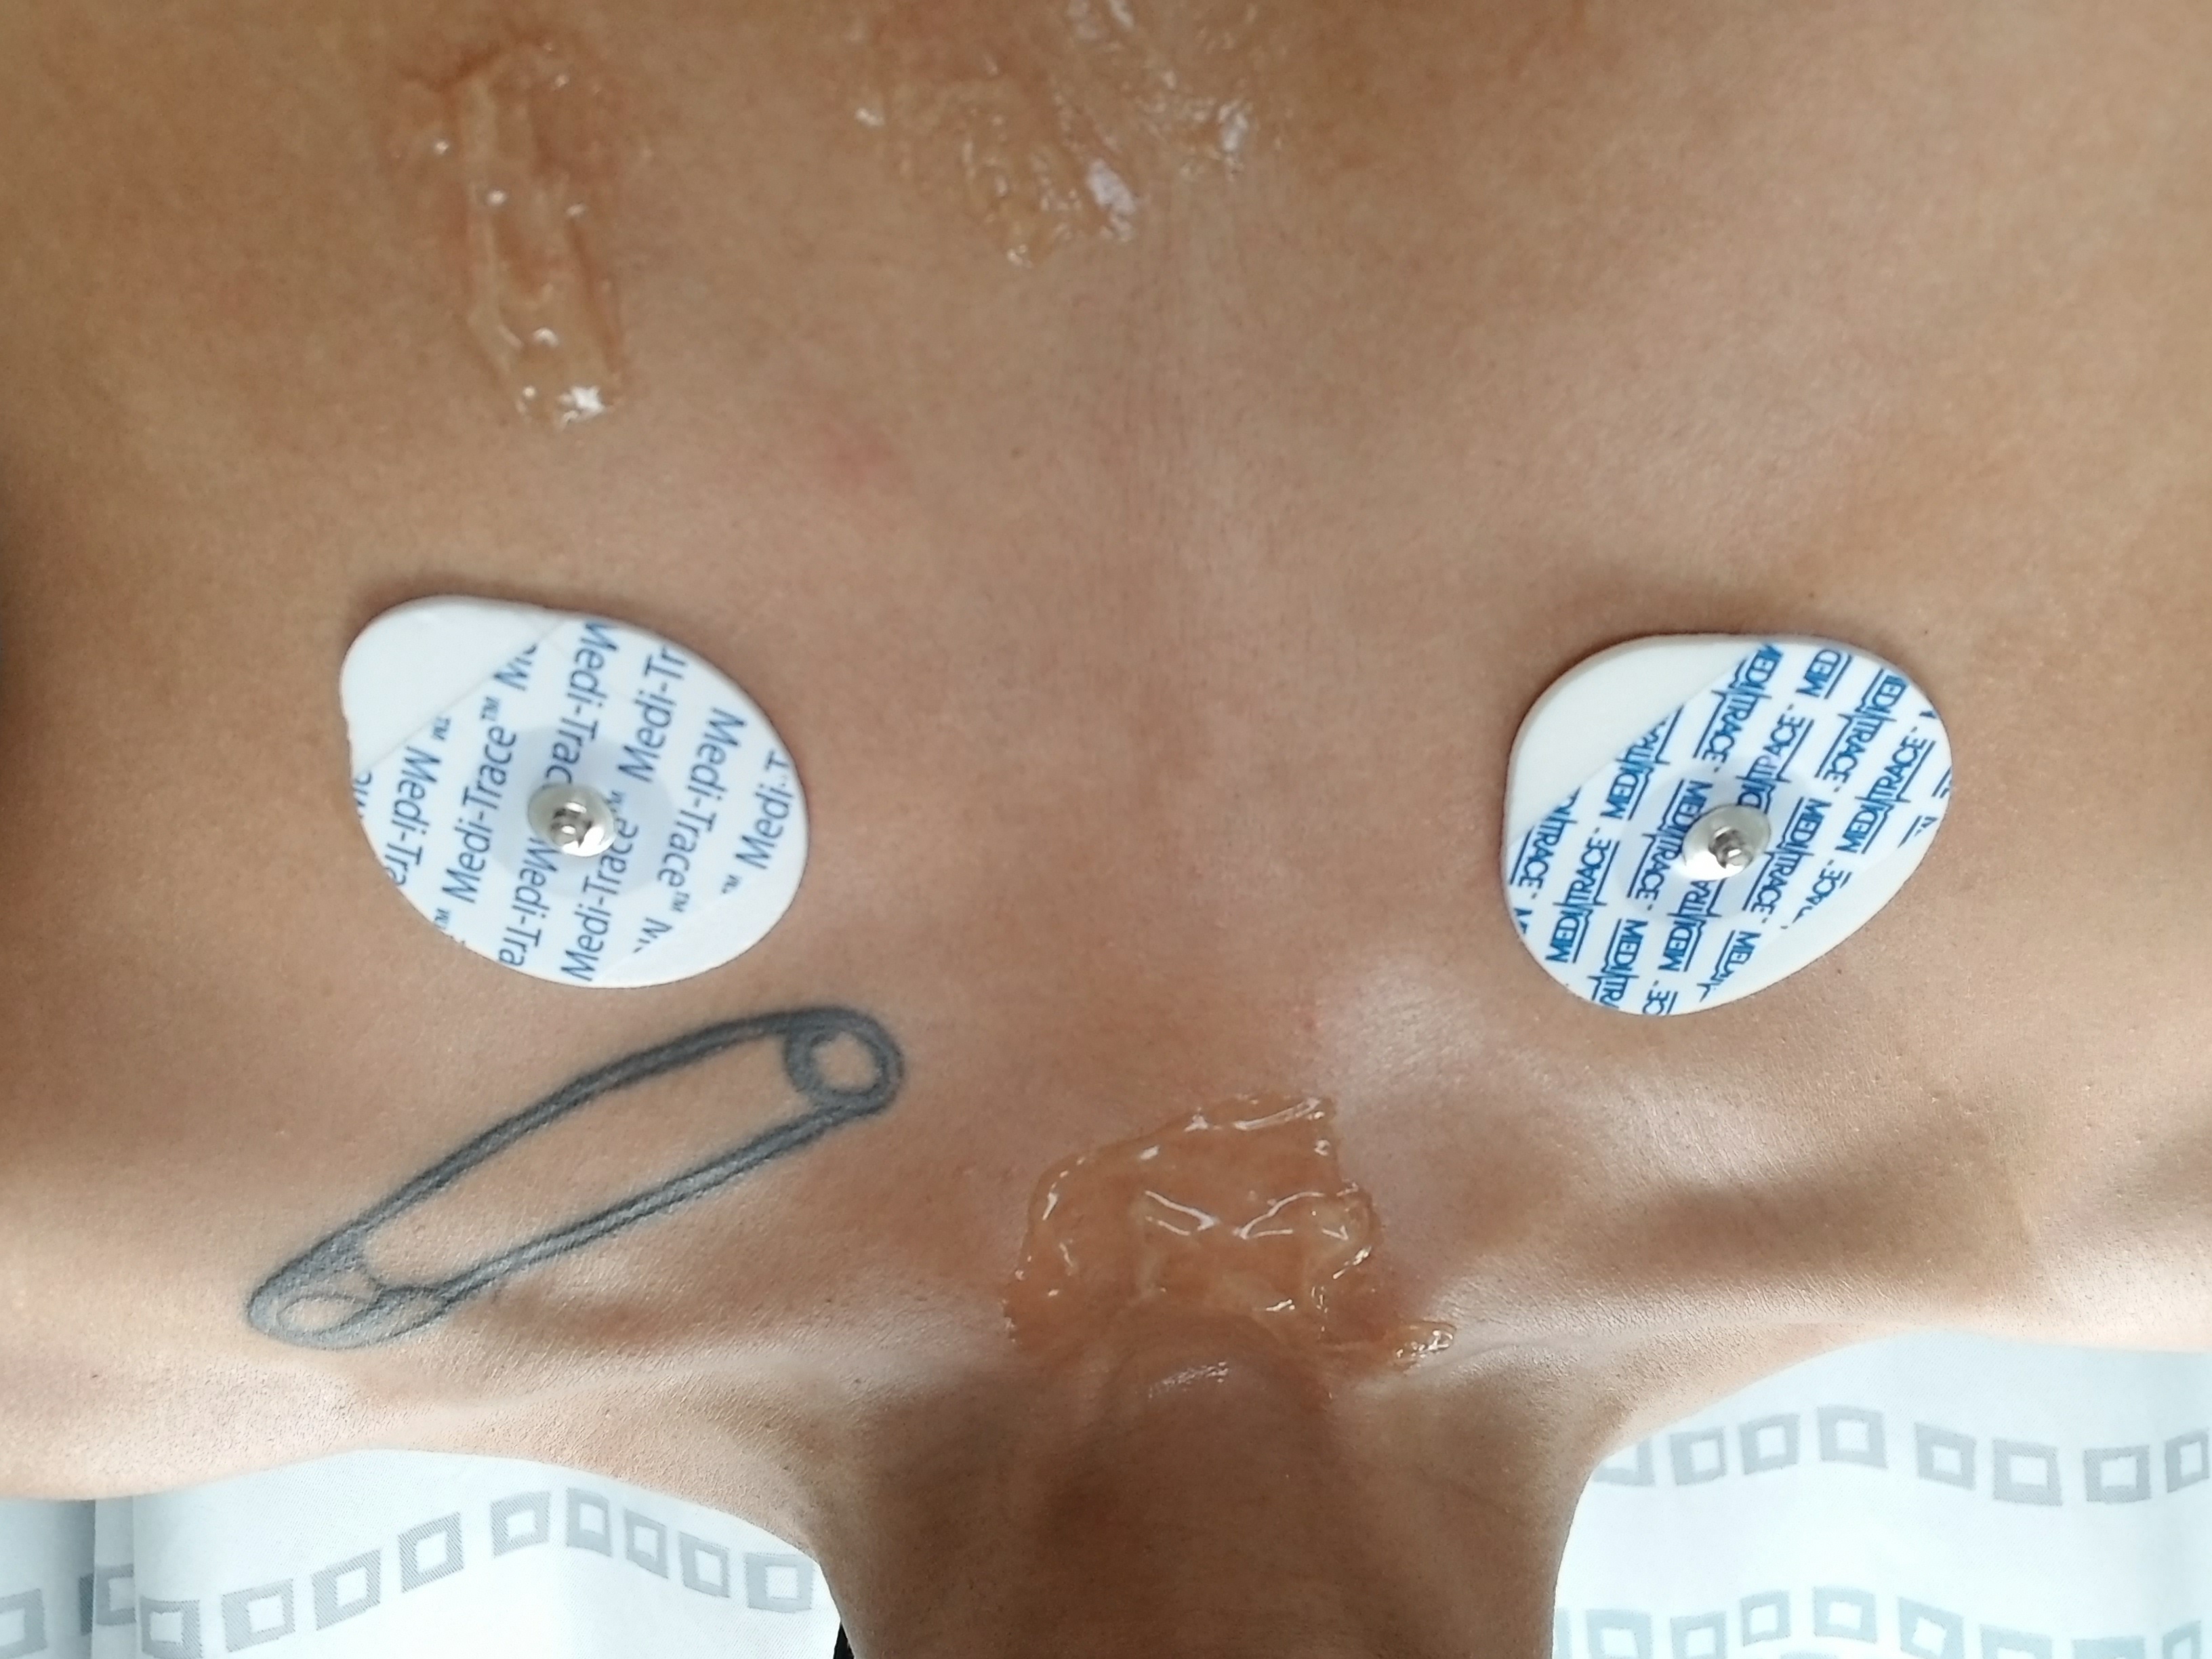 My upper chest smeared in conductive gel and stickered with two electrodes.